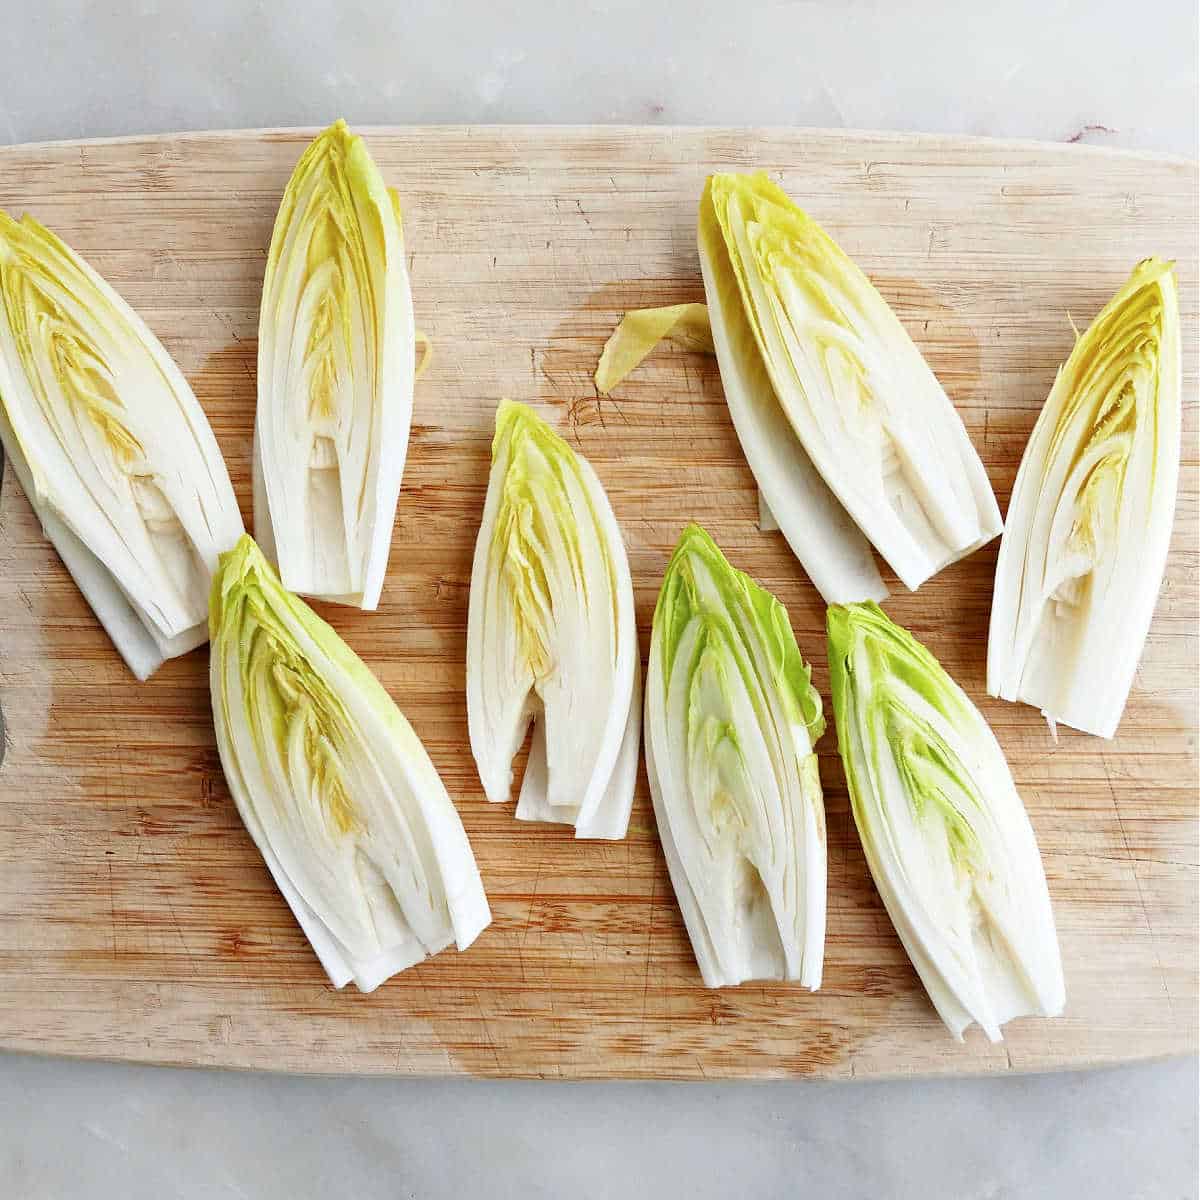 heads of endive sliced in half lengthwise with cores removed on a cutting board